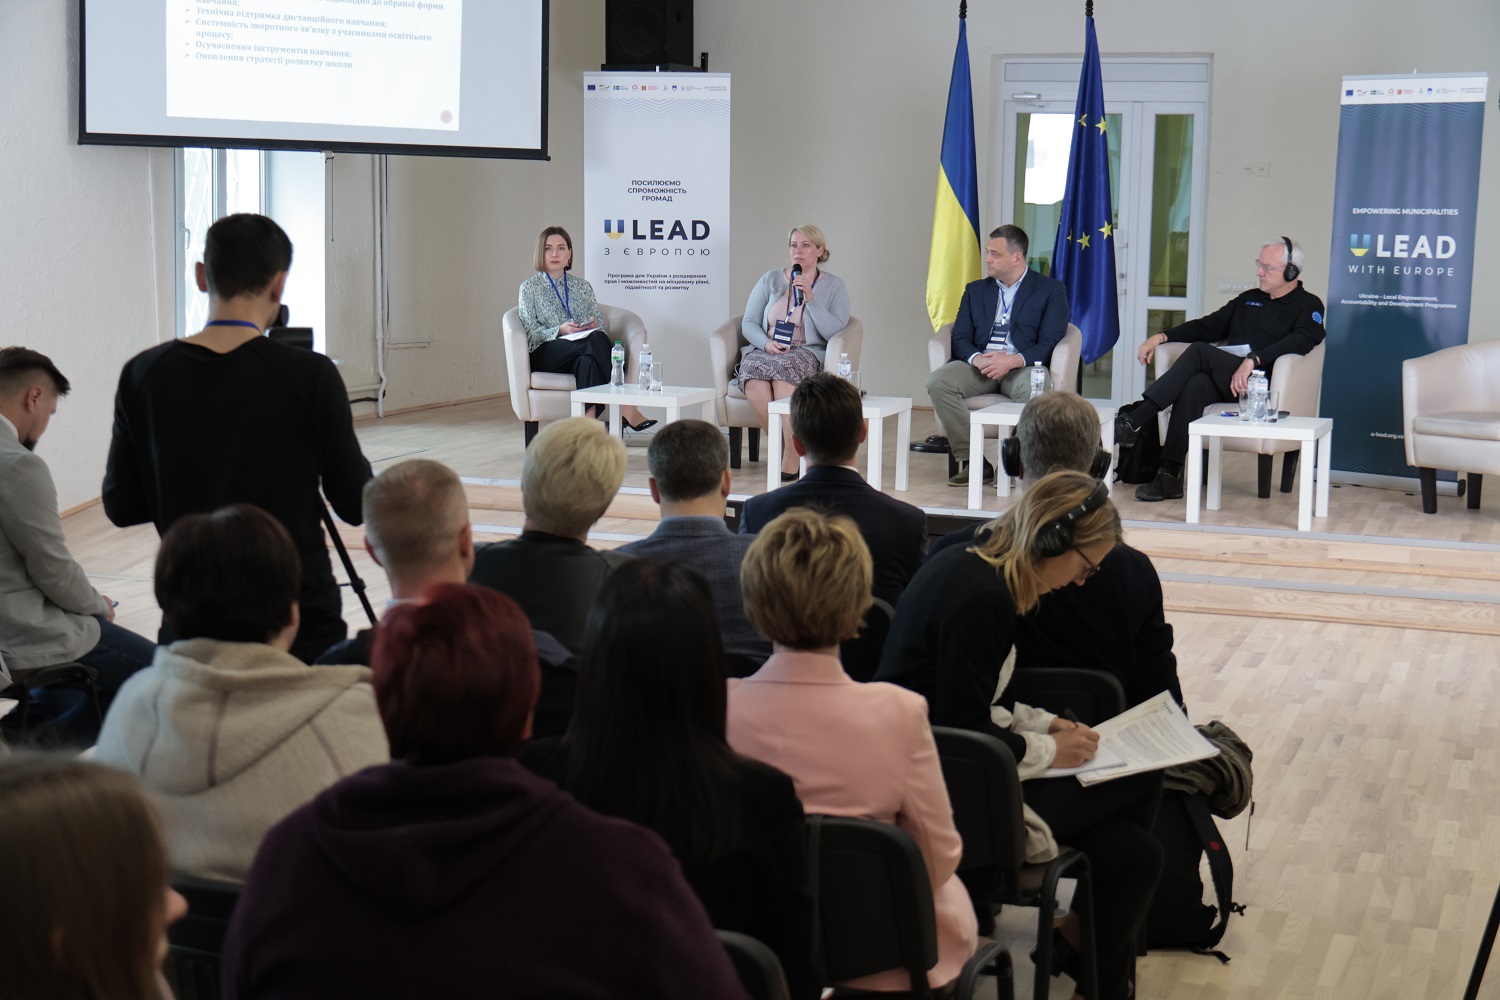 12 schools will be restored in three regions of Ukraine with the support of U-LEAD